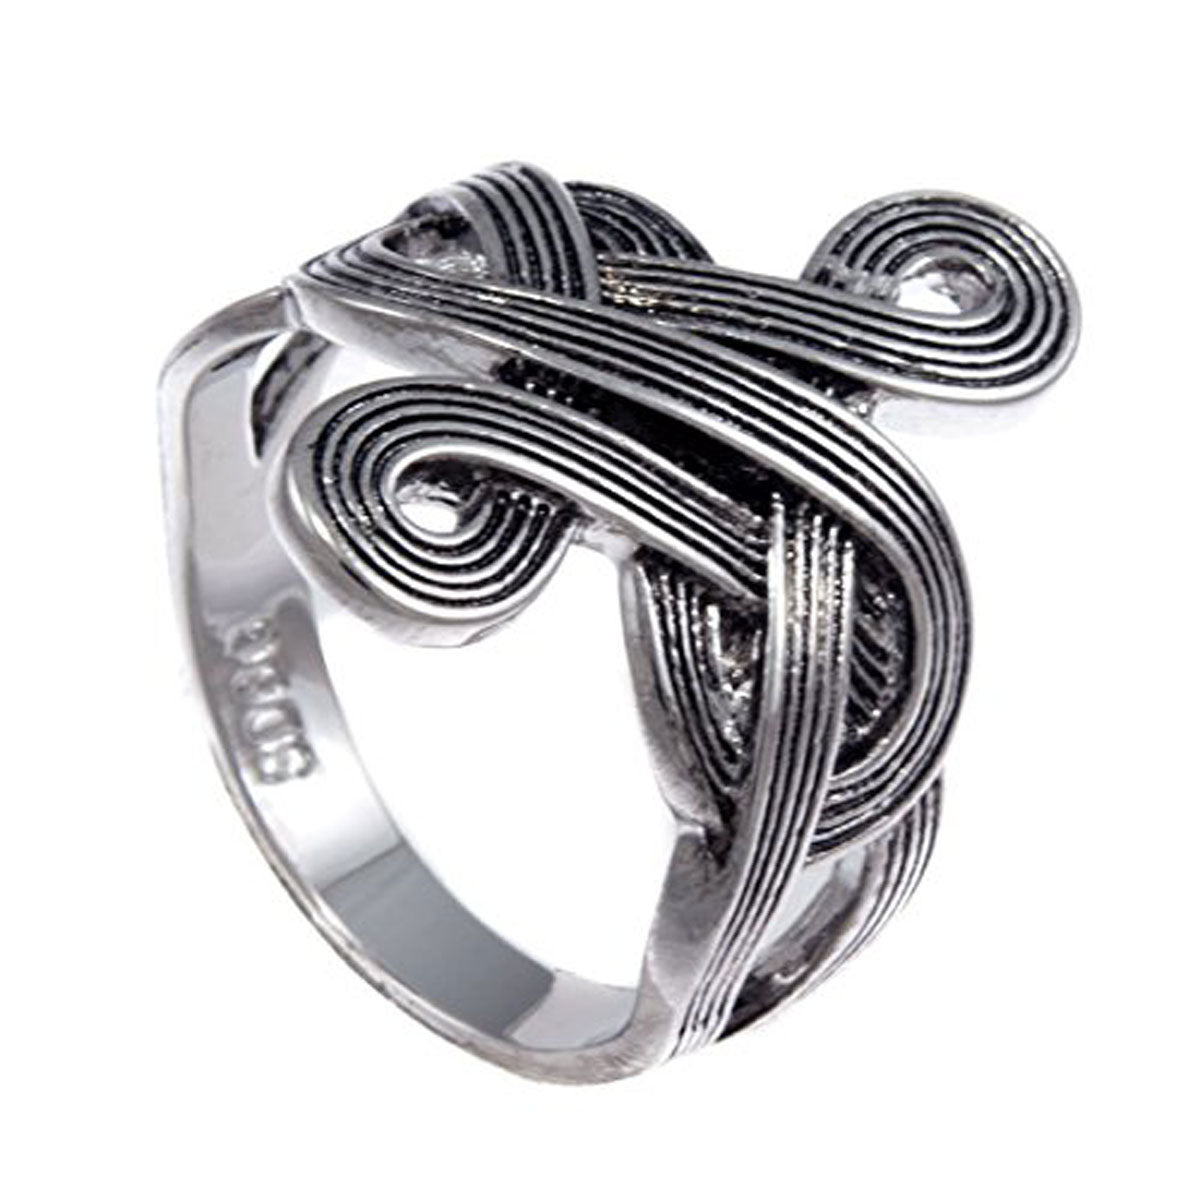 Gifts Infinity Silver Tone Ring Rolling Interlocking Silver Rings High Polish Rings for Women - Ladies Bling Iced Ring